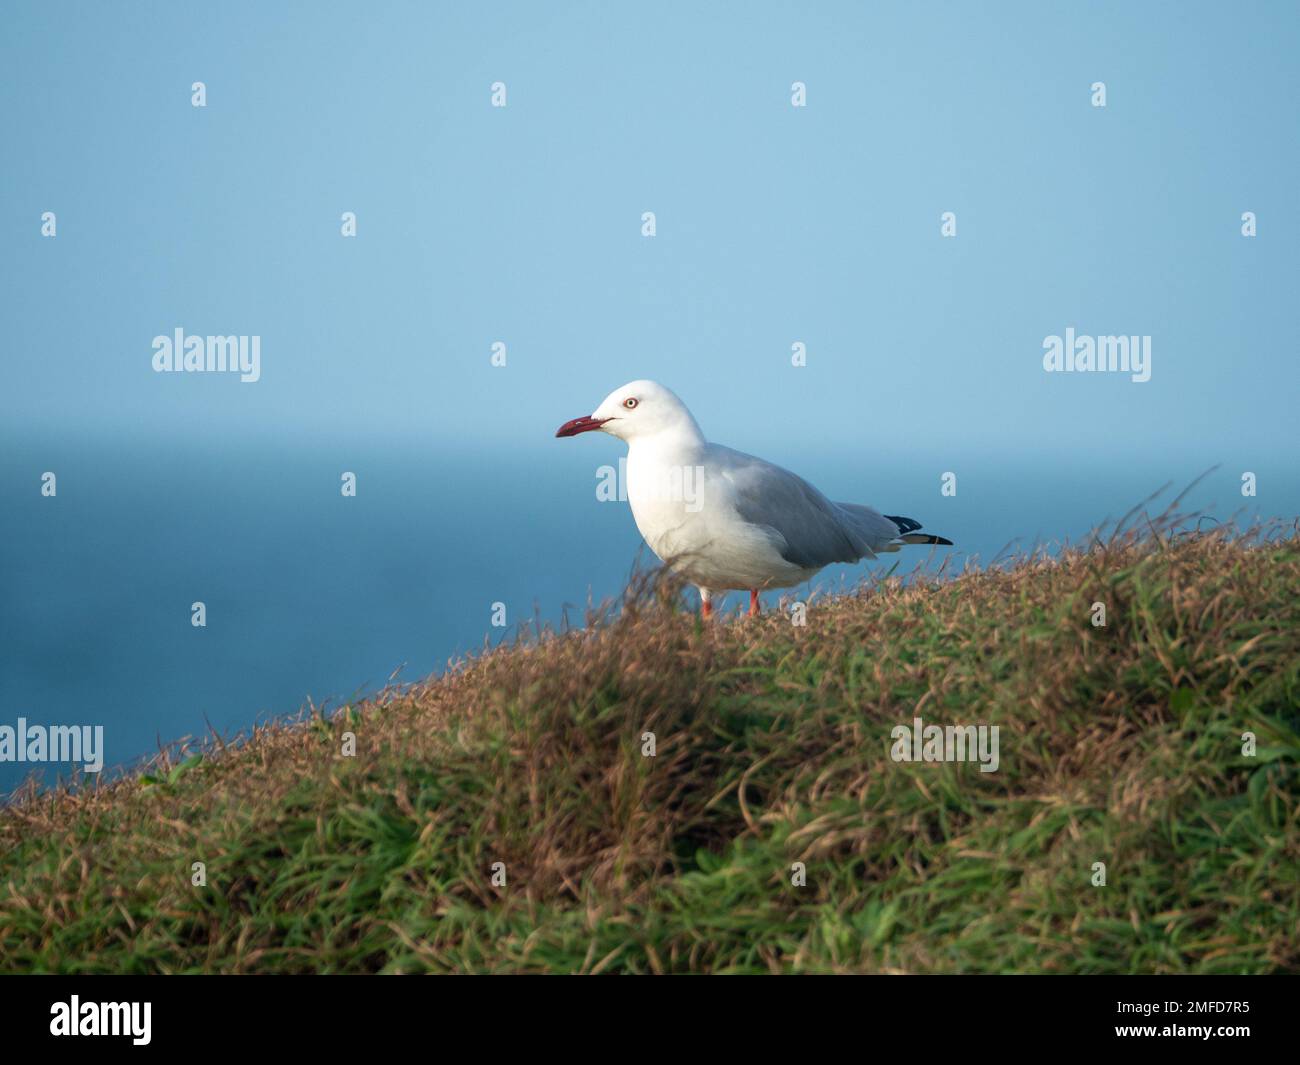 Birds, an Australian Silver Gull Seagull standing on the grassy headland looking out to sea, Horizon and pale blue sky, Australia Stock Photo